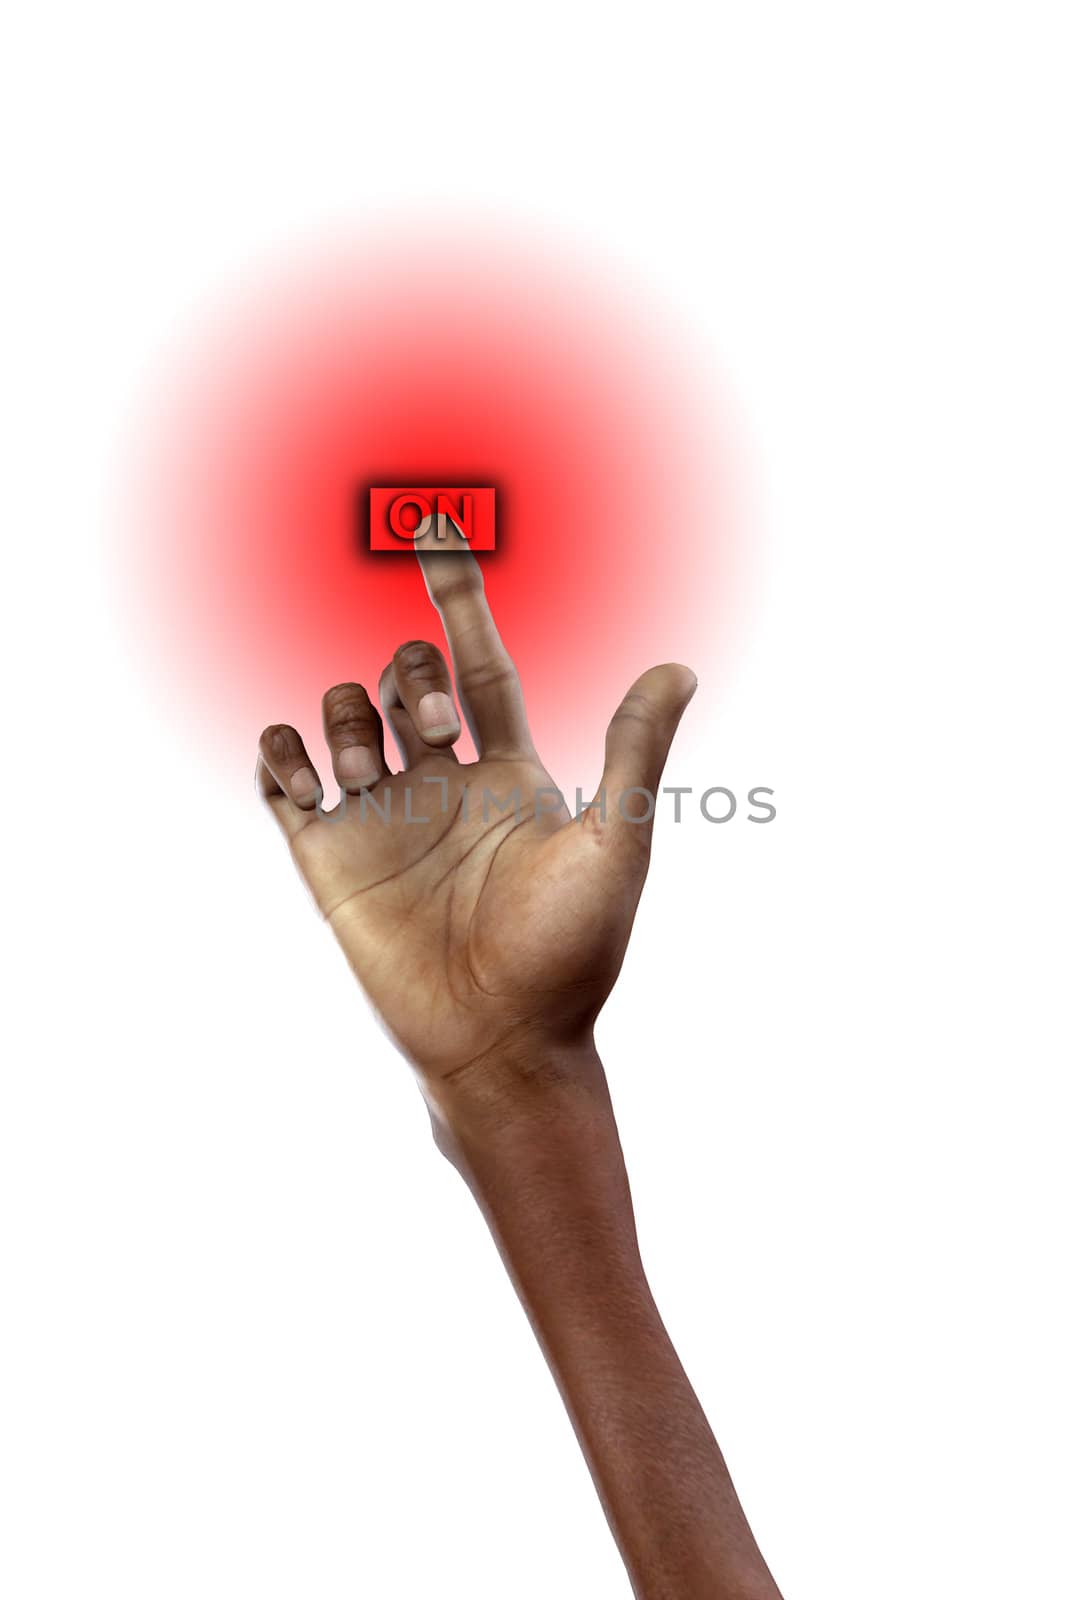 Conceptual image of a hand touching an on button.